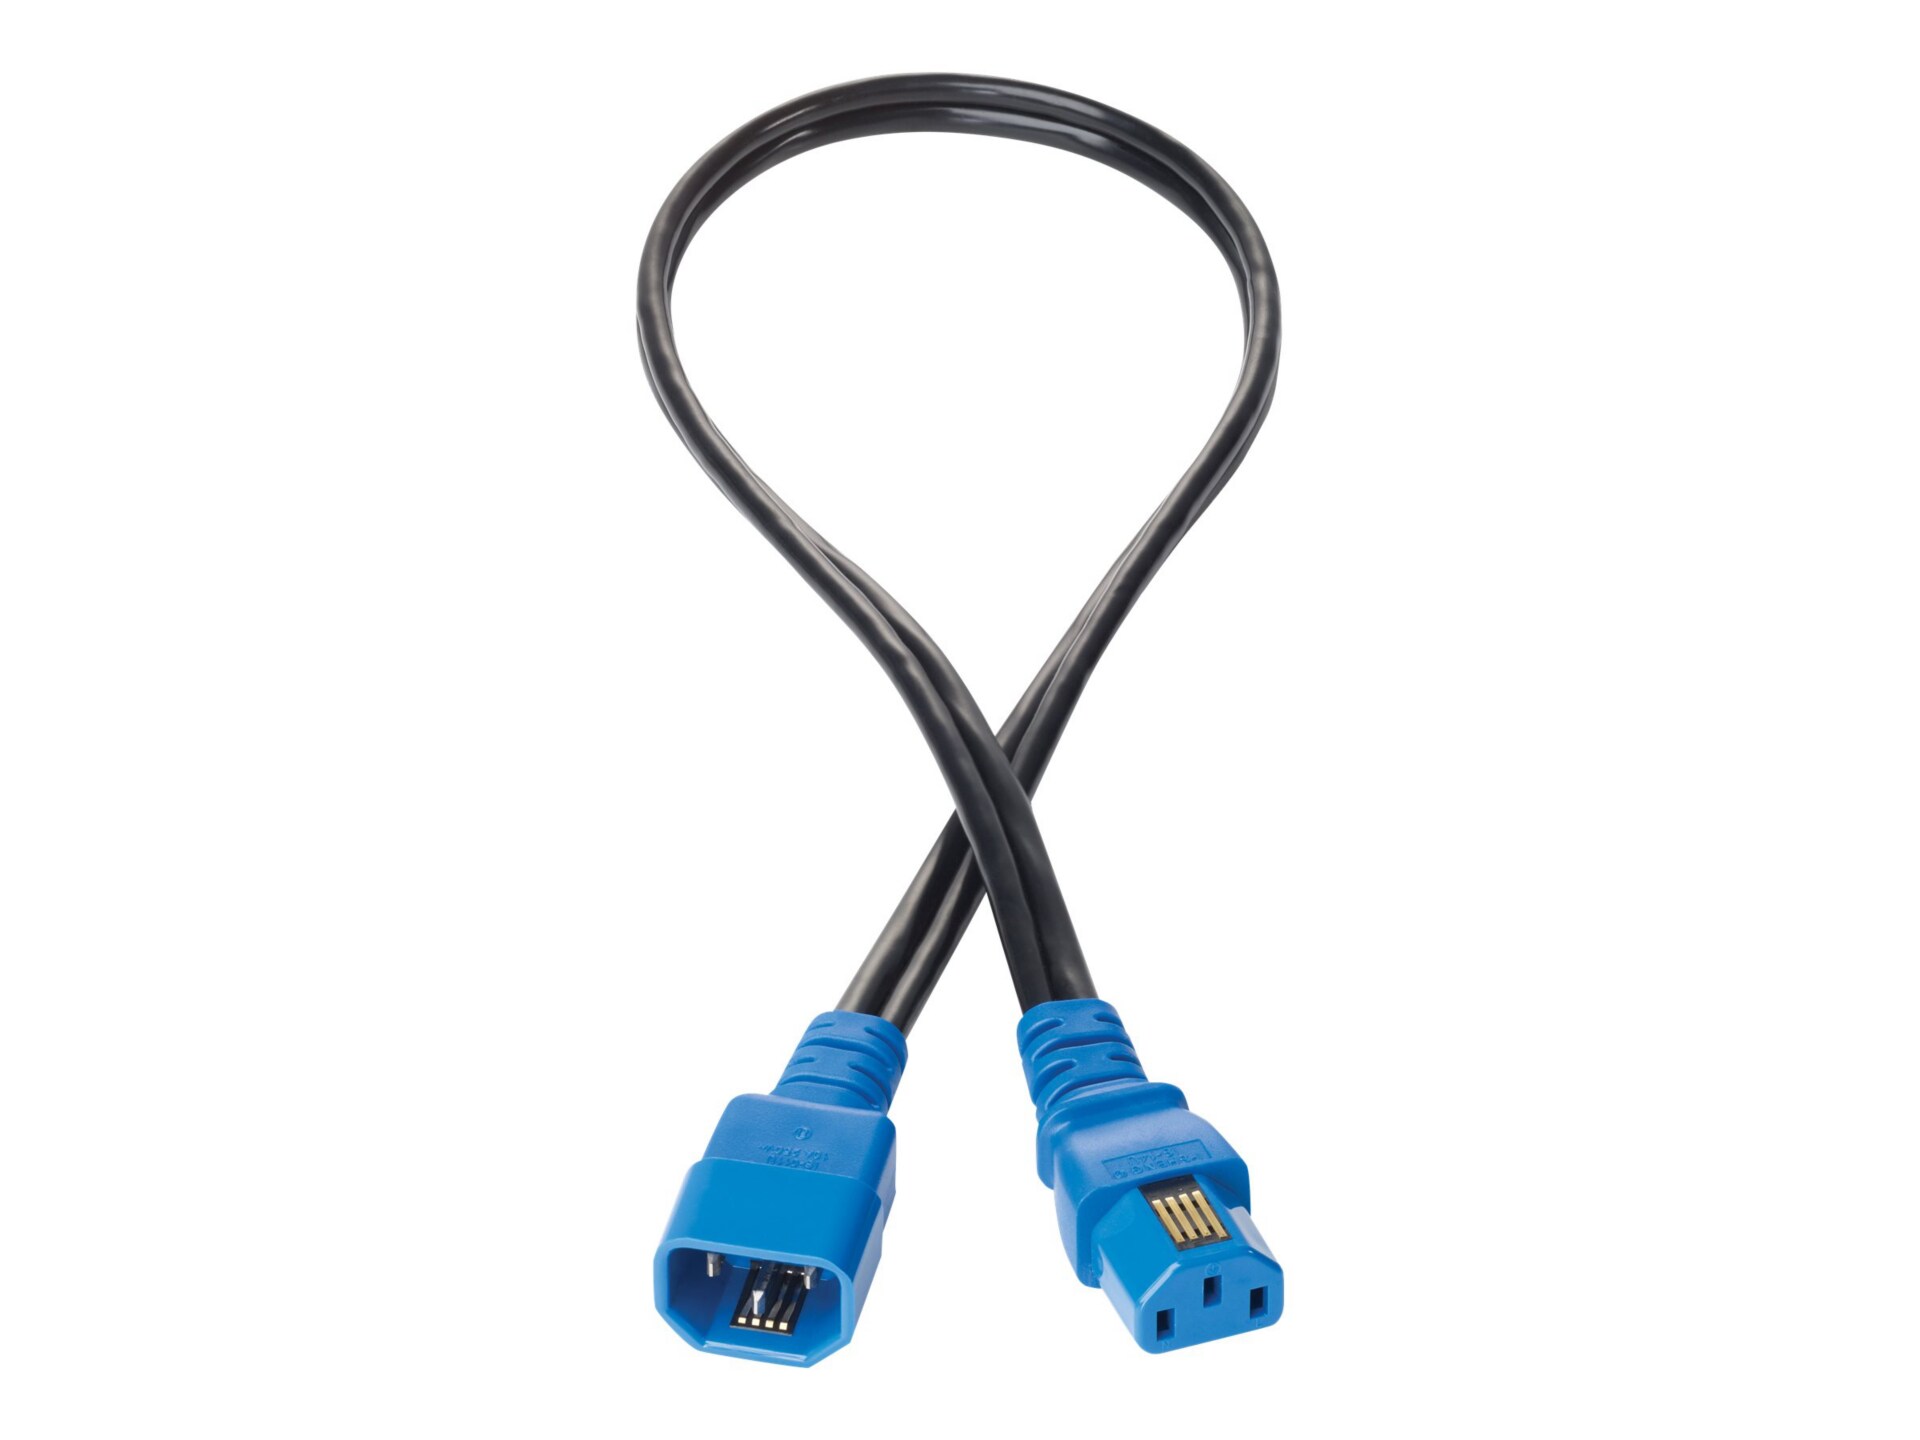 HPE Jumper Cord - power cable - IEC 60320 C19 to IEC 60320 C20 - 1.2 m